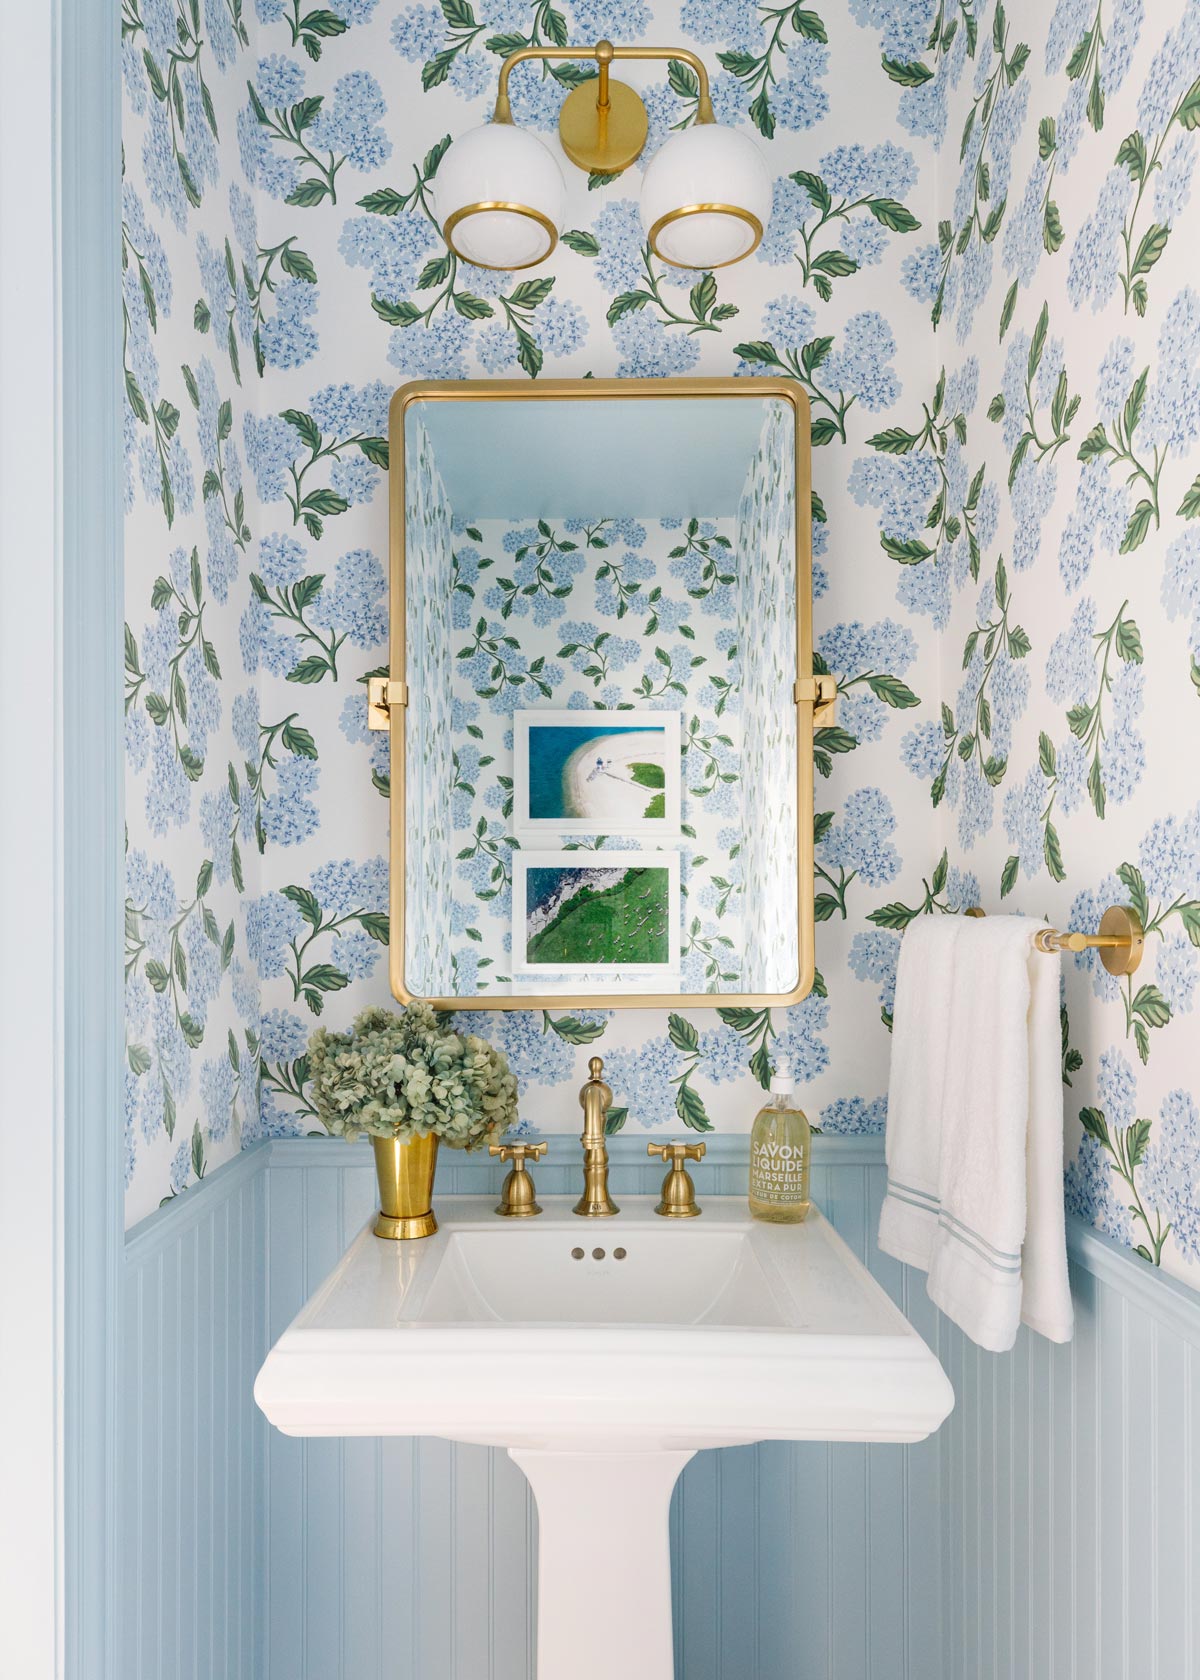 Our Powder Room Redesign | Hydrangea Wallpaper - Style Charade